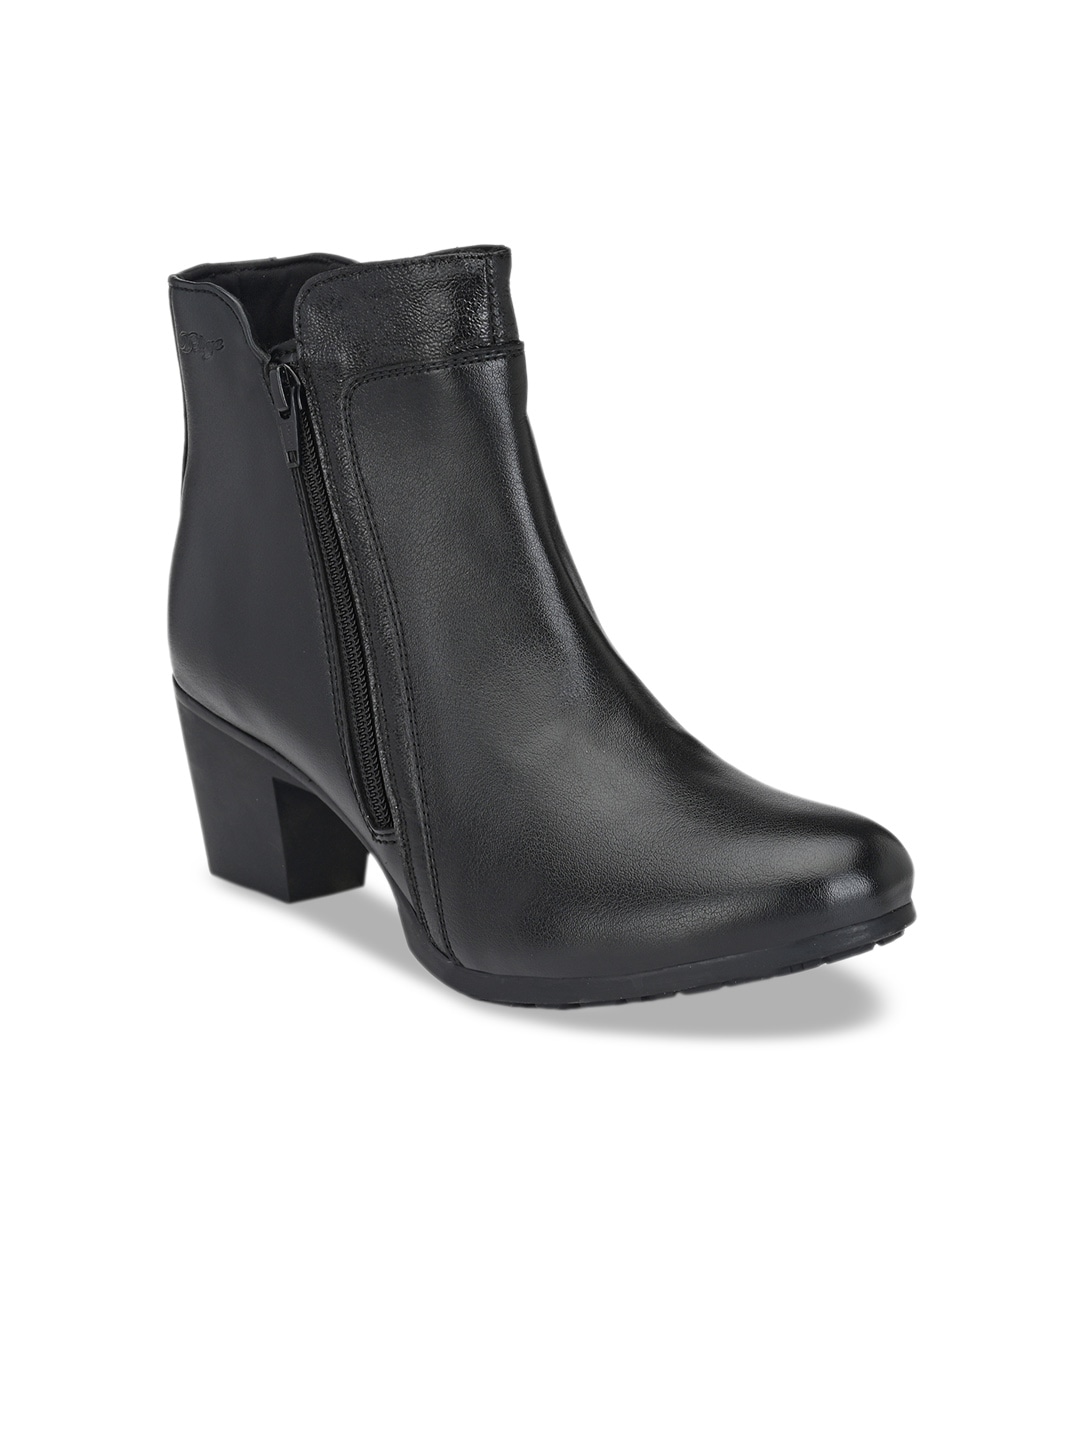 Delize Women Black Textured Heeled Boots Price in India